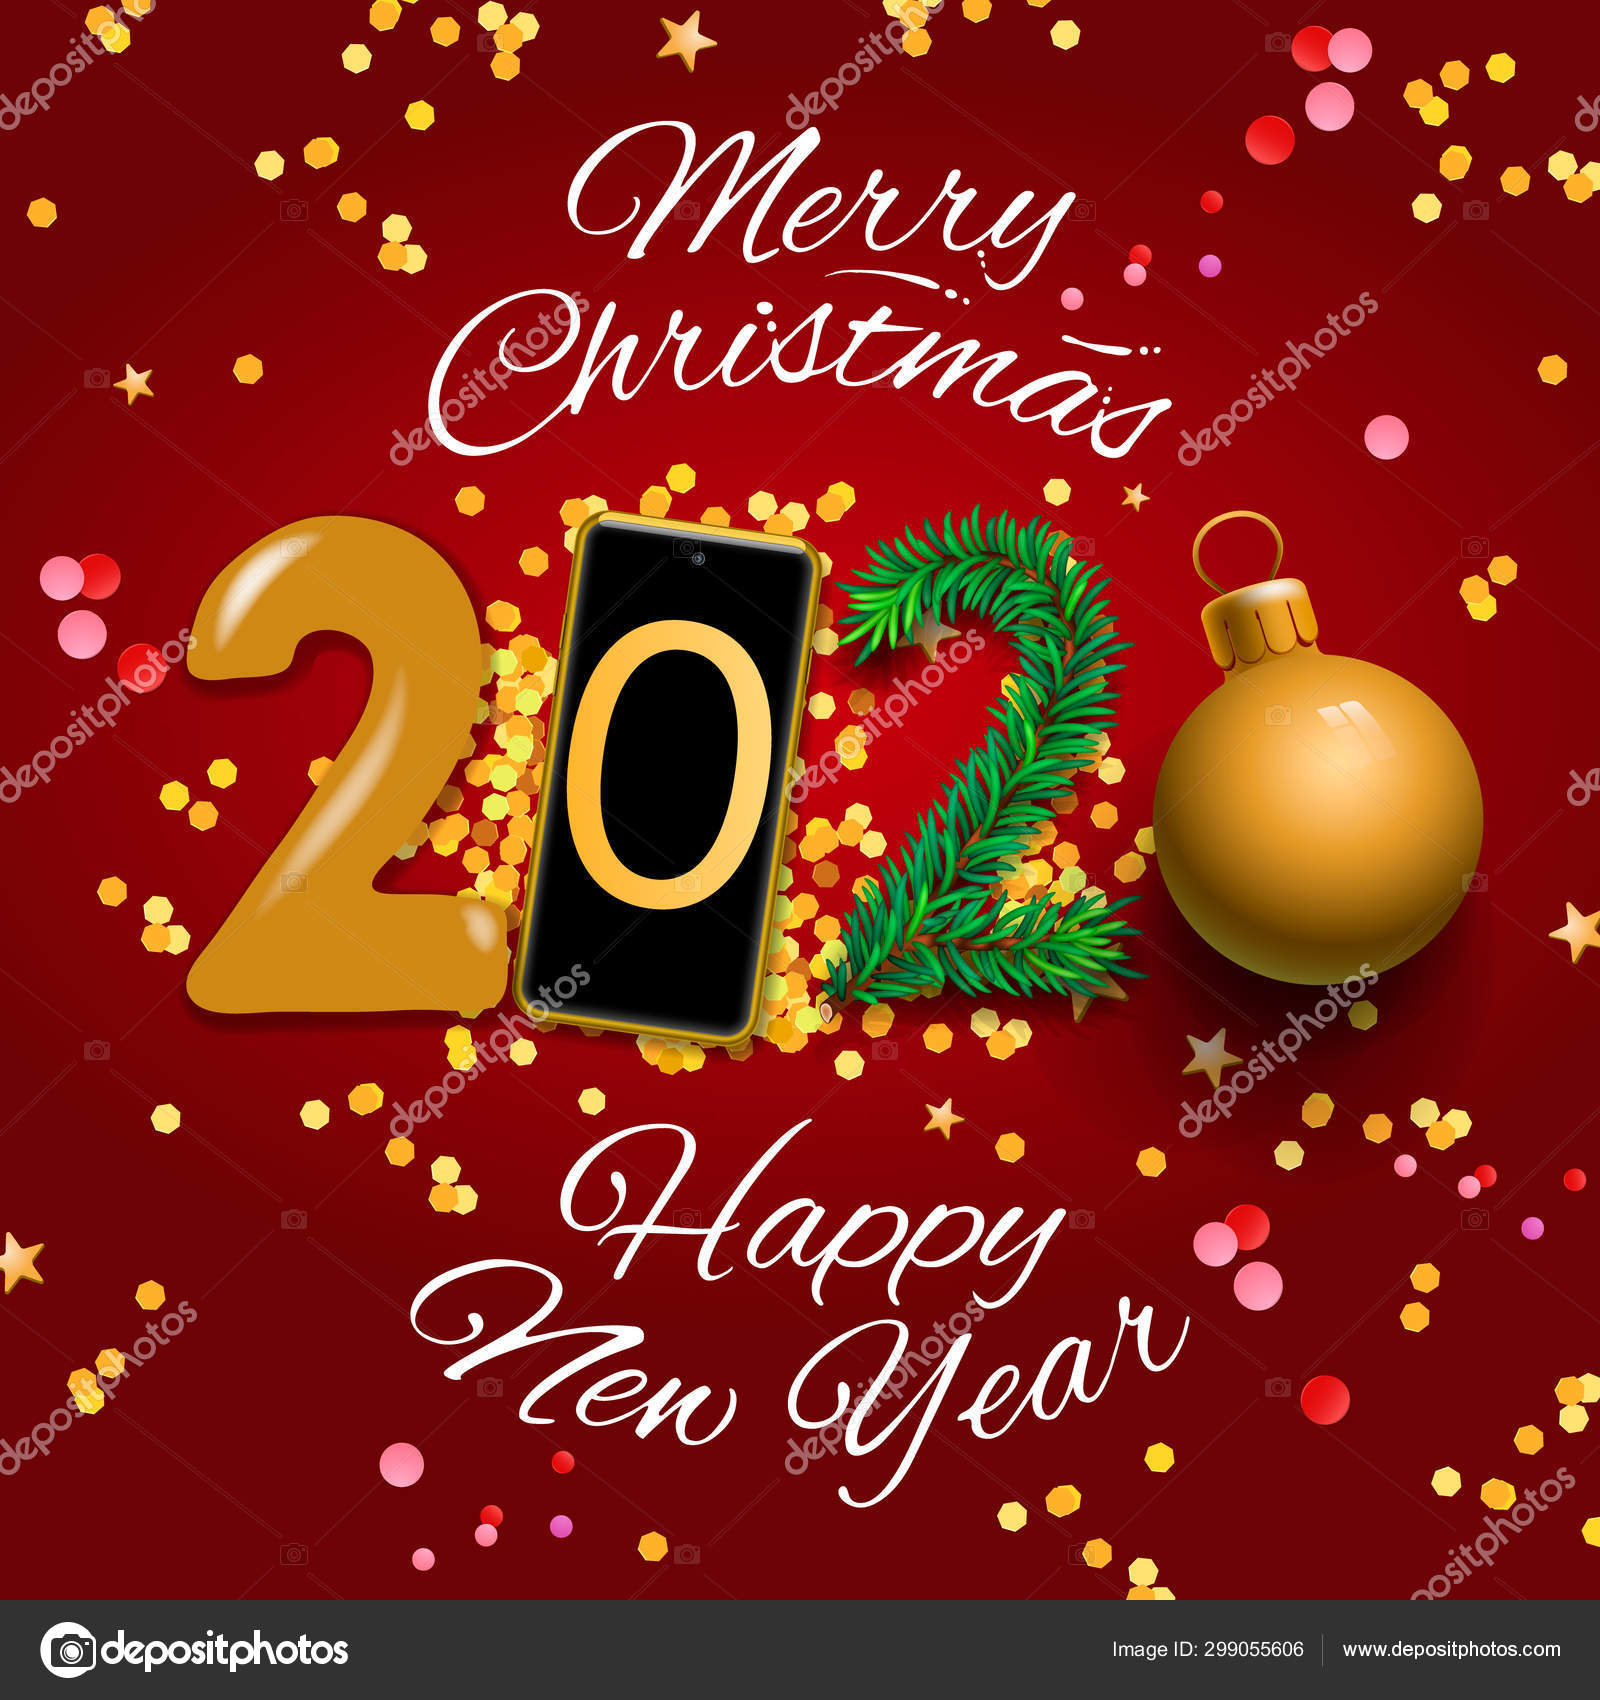 Merry Christmas and Happy New Year 2020 greeting card, vector ...